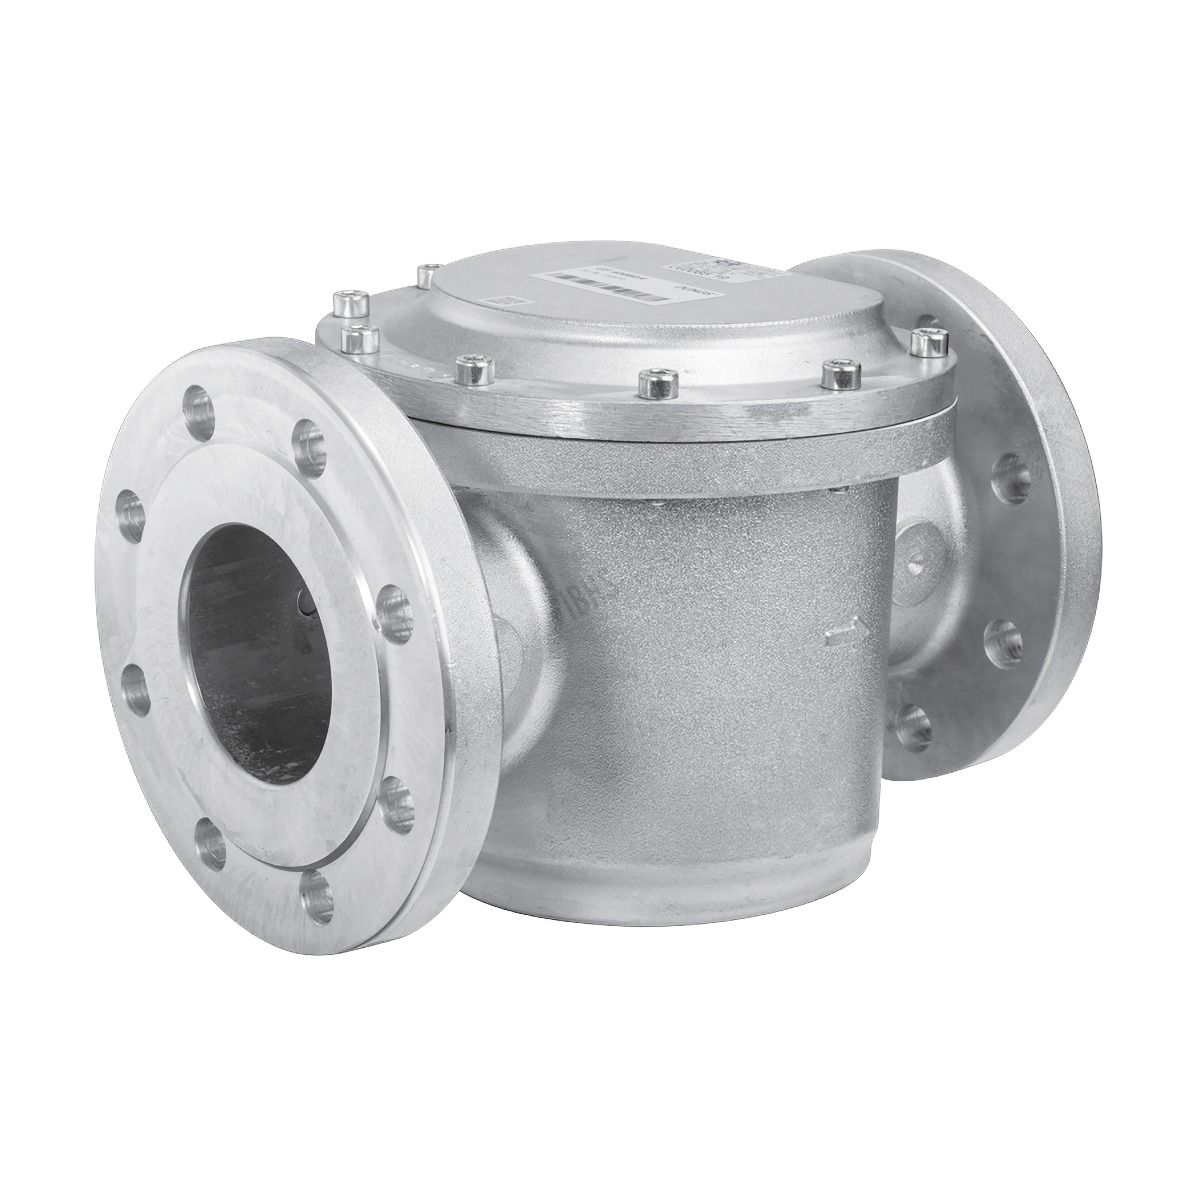 150mm Flanged PN16 Gas Filter 6 Bar Max Operating Pressure